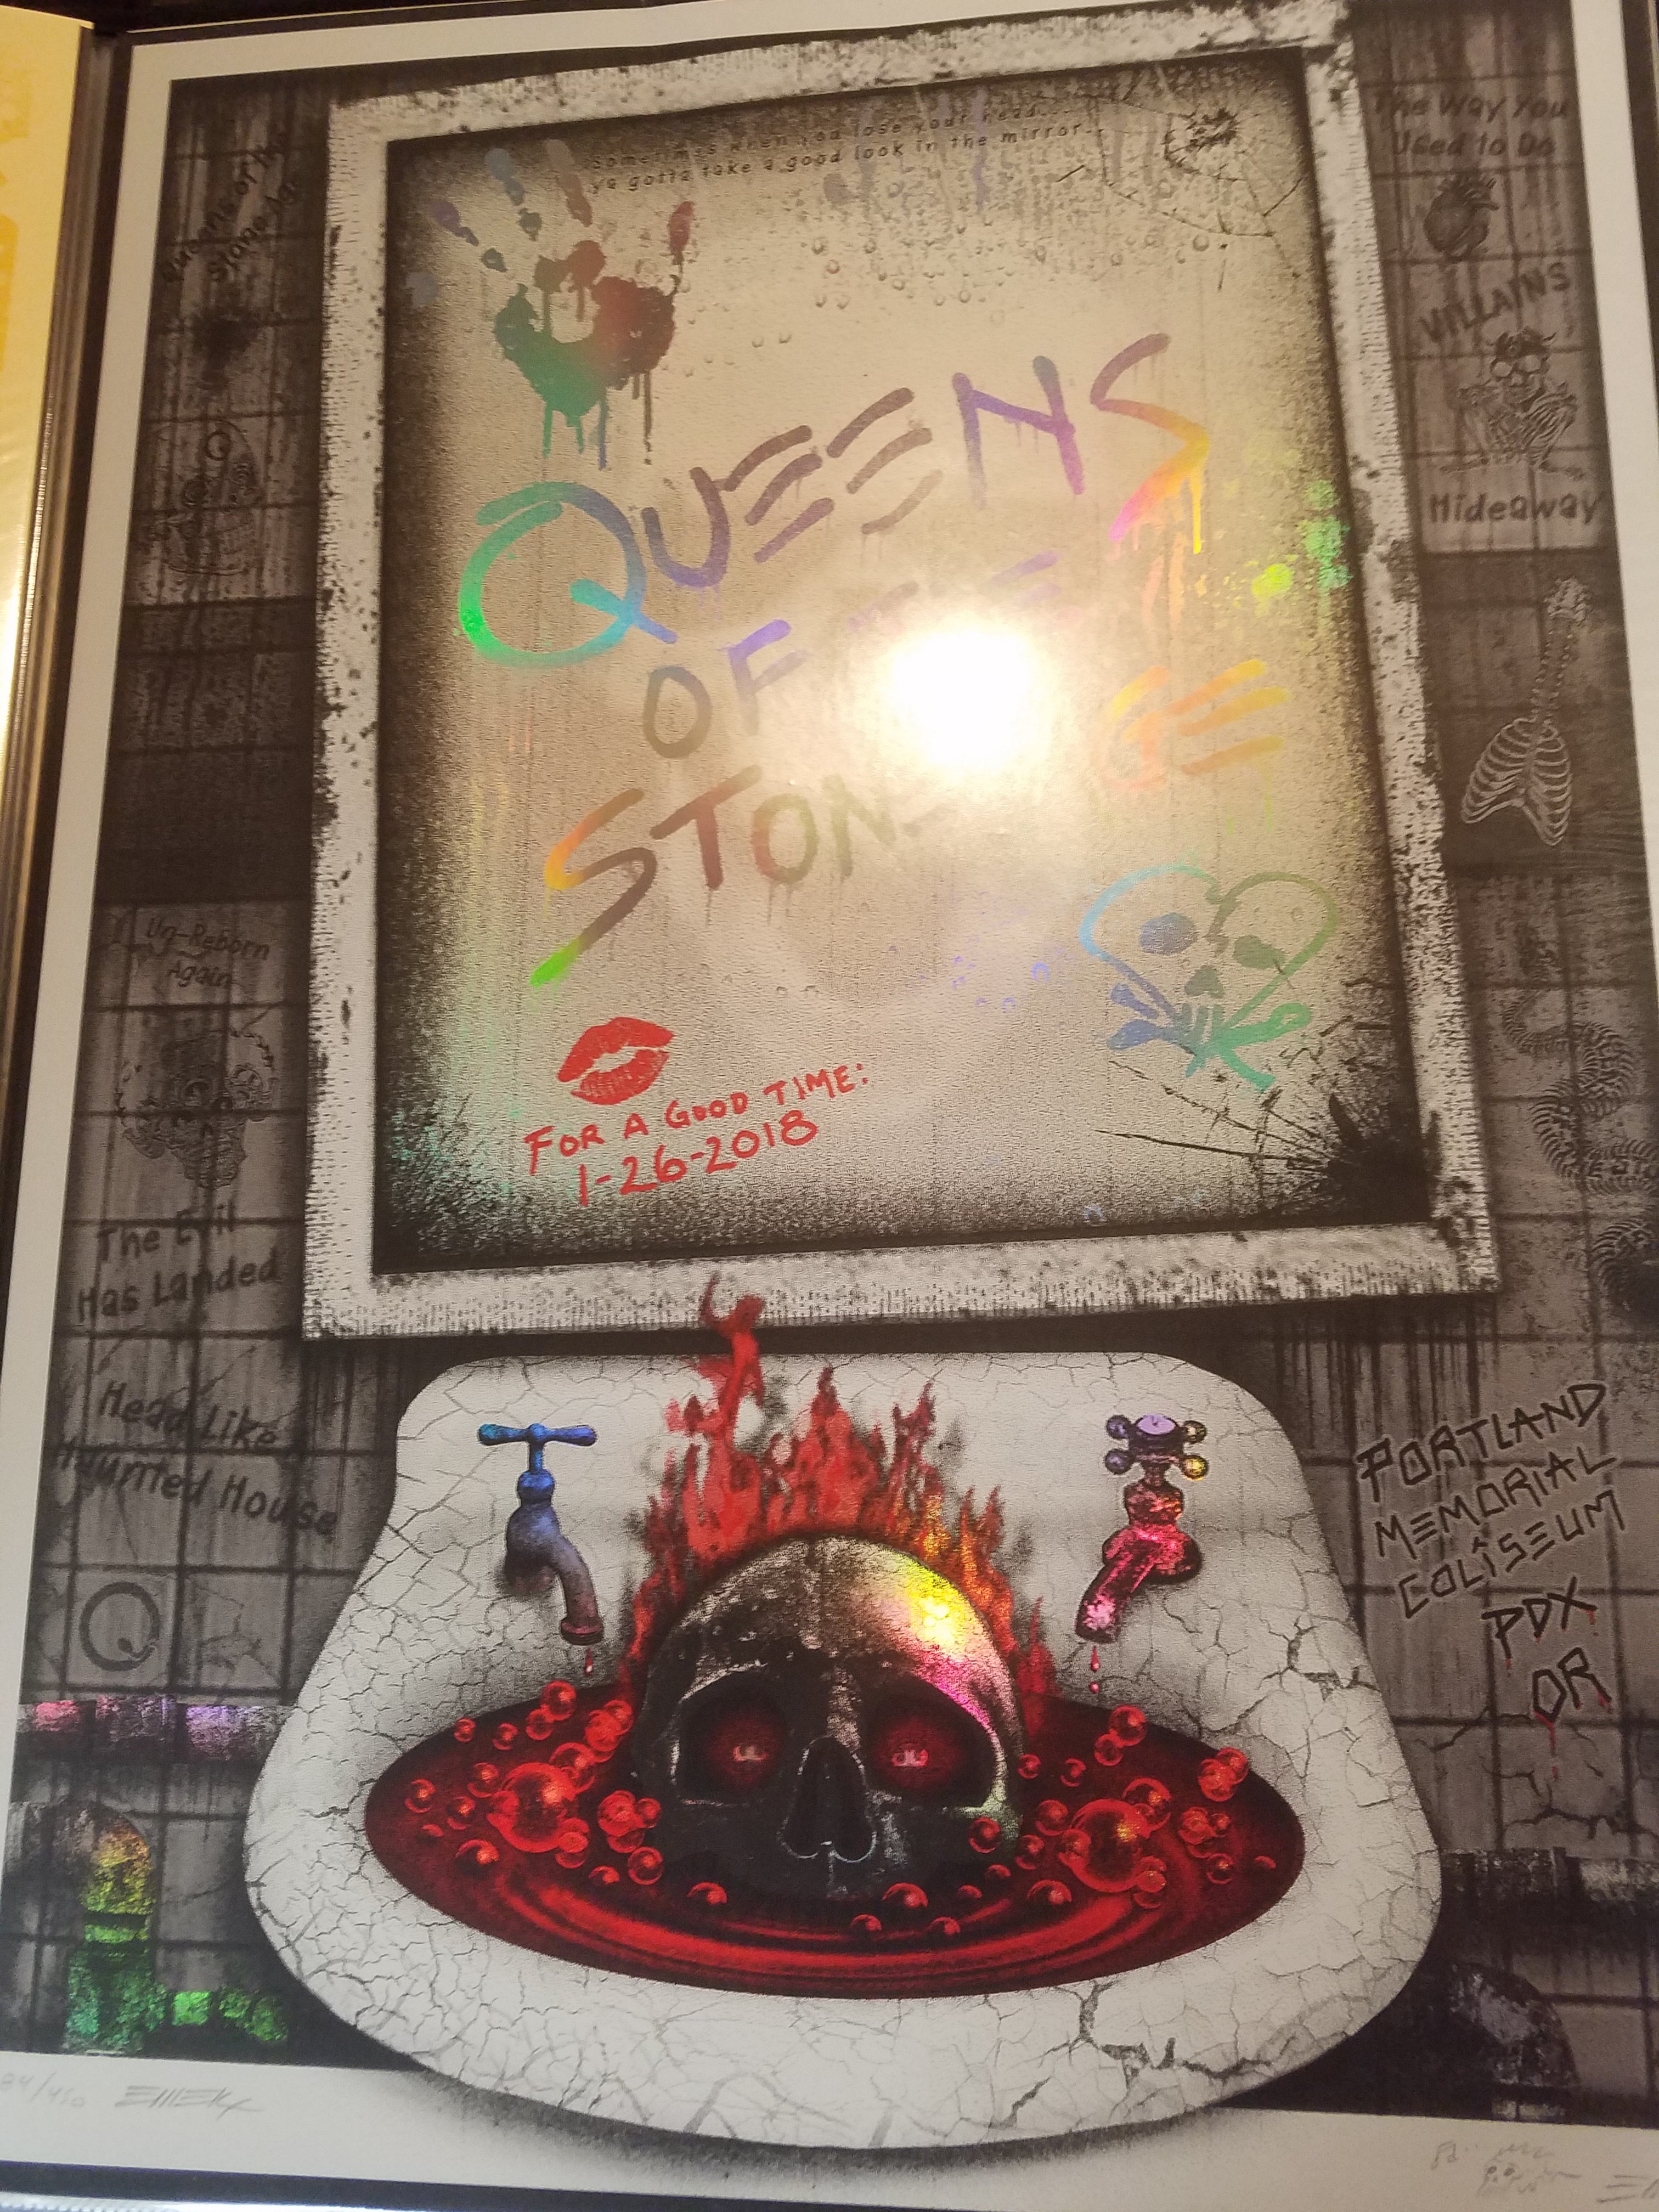 Title: Queens of the Stone Age Mirror Foil (2018)  Artist: EMEK  Edition: 1/26/2018 Limited Edition Screen Printed Poster of 450, signed and numbered by the artist.  Type: Rainbow Foil Mirror Holographic Paper with Glow-In-The-Dark Inks  Size: 18" X 24"  Location: Portland, OR  Venue: Portland Memorial Coliseum